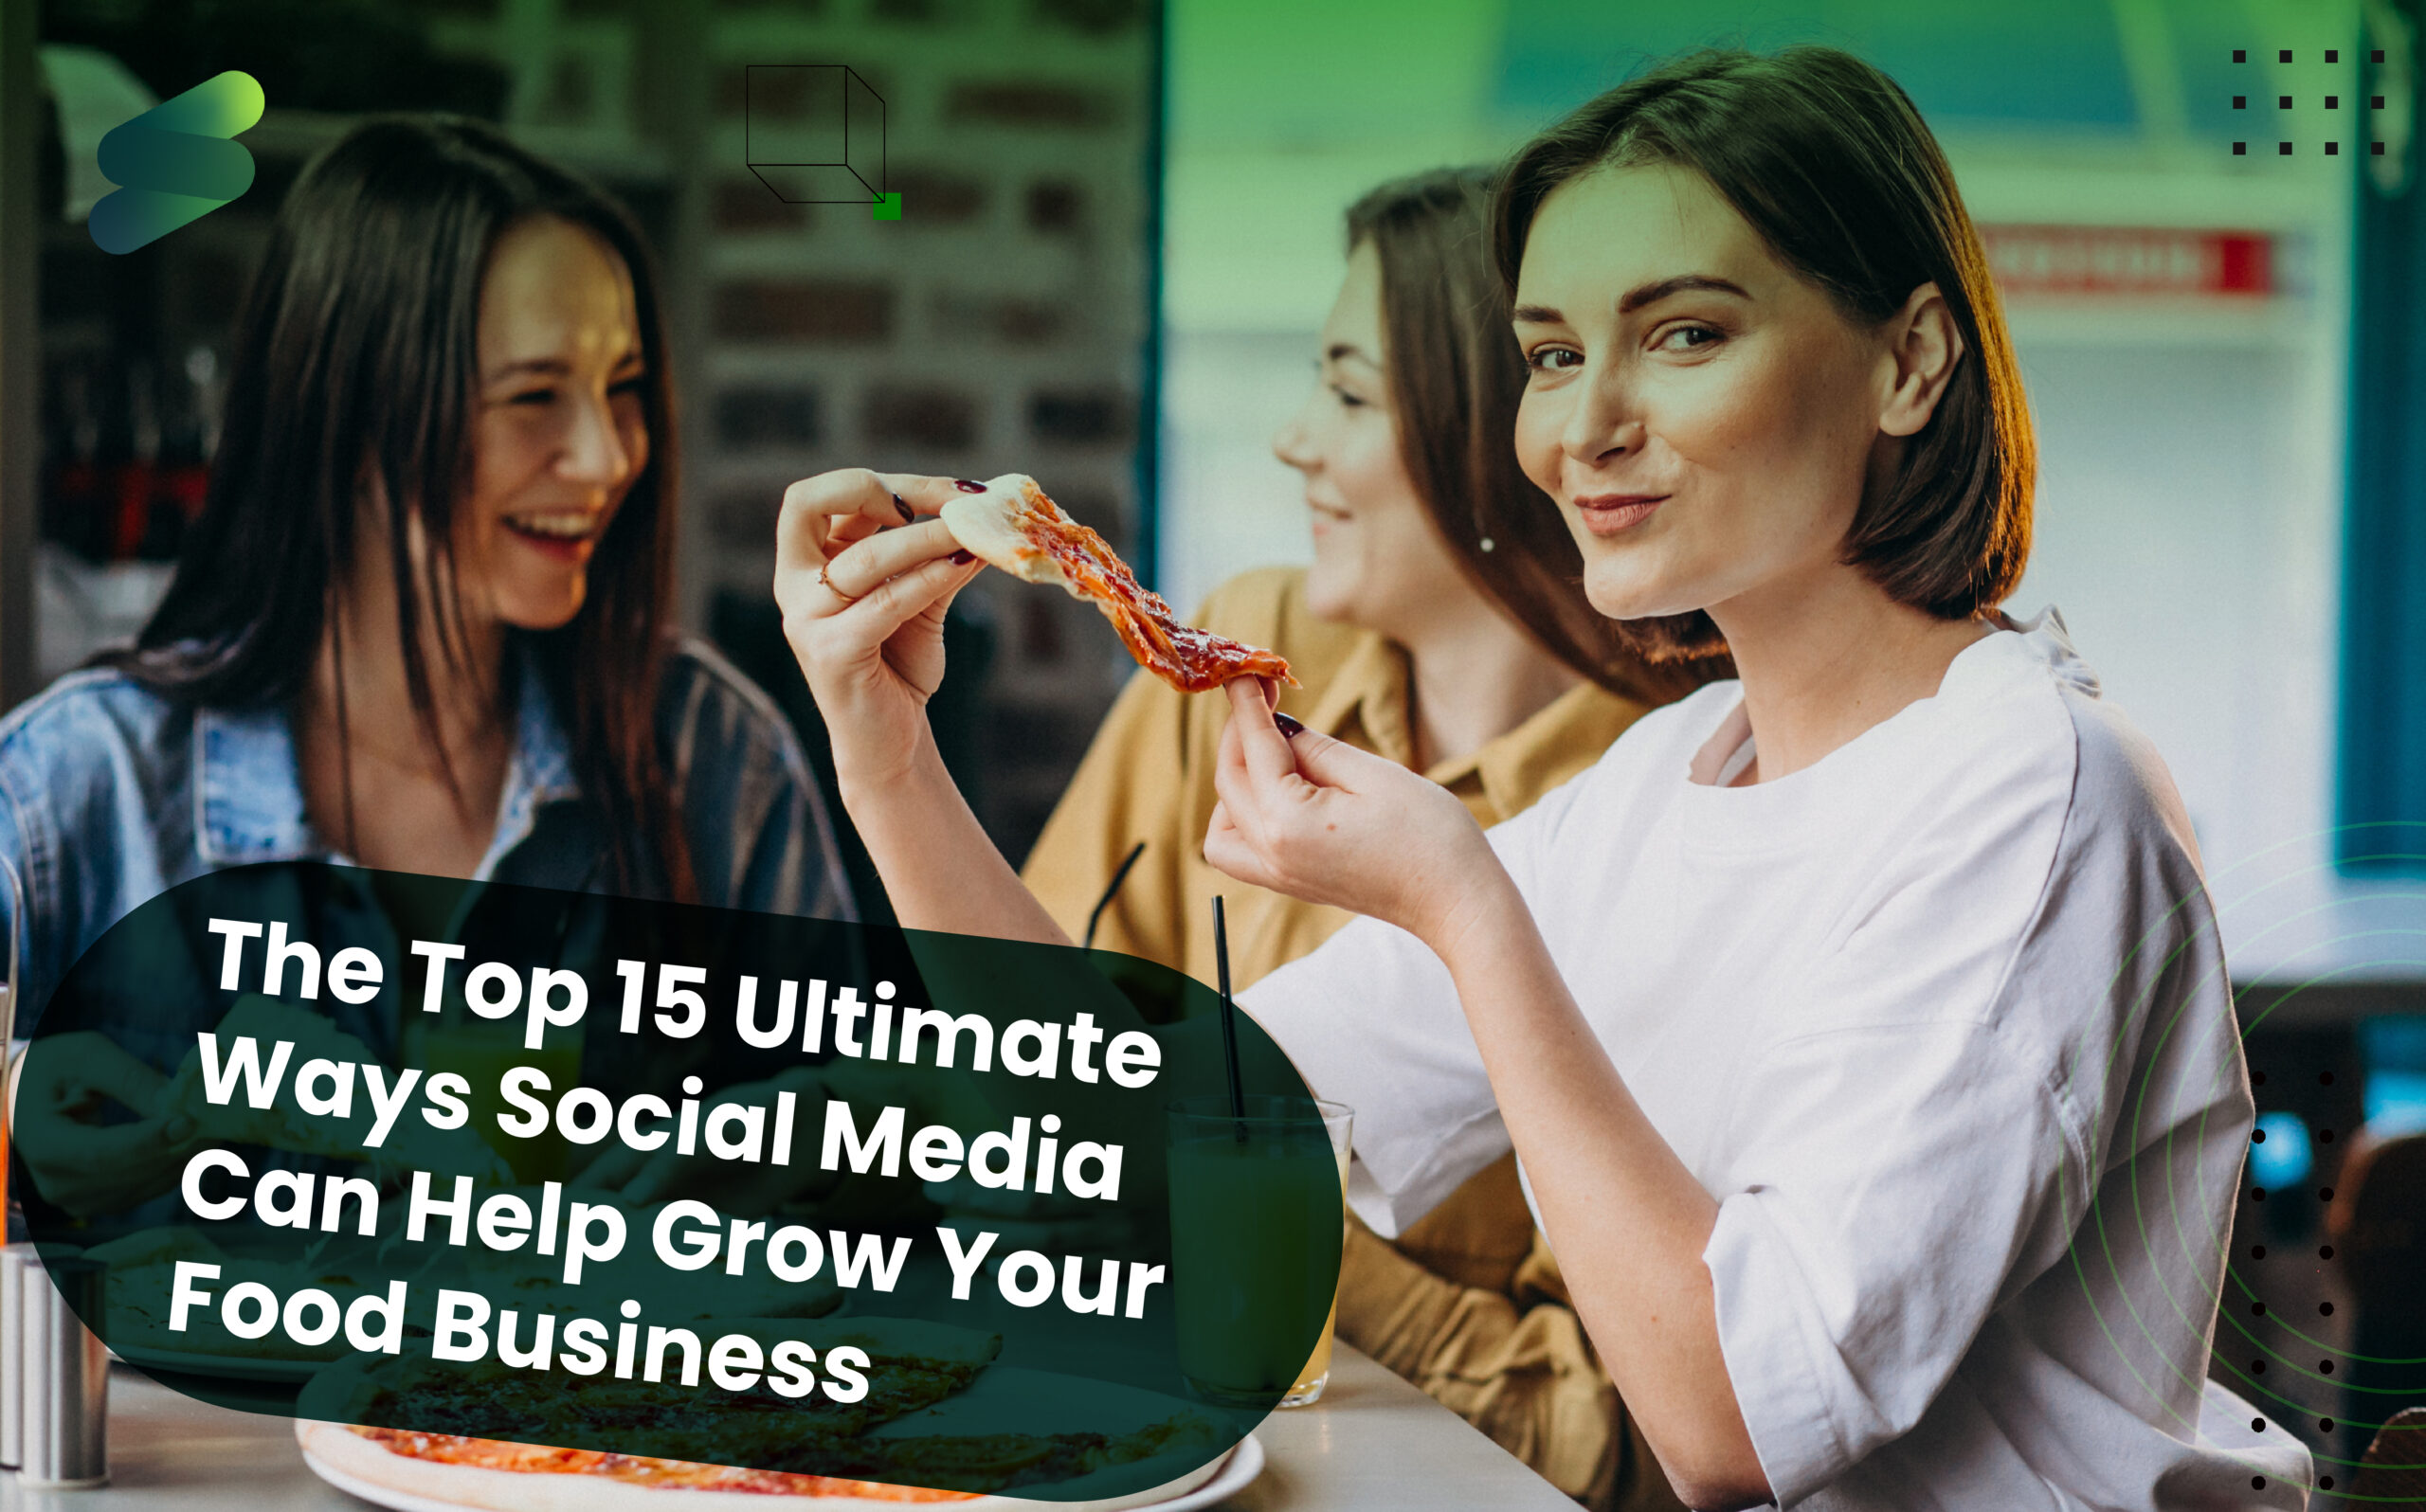 The Top 15 Ultimate Ways Social Media Can Help Grow Your Food Business